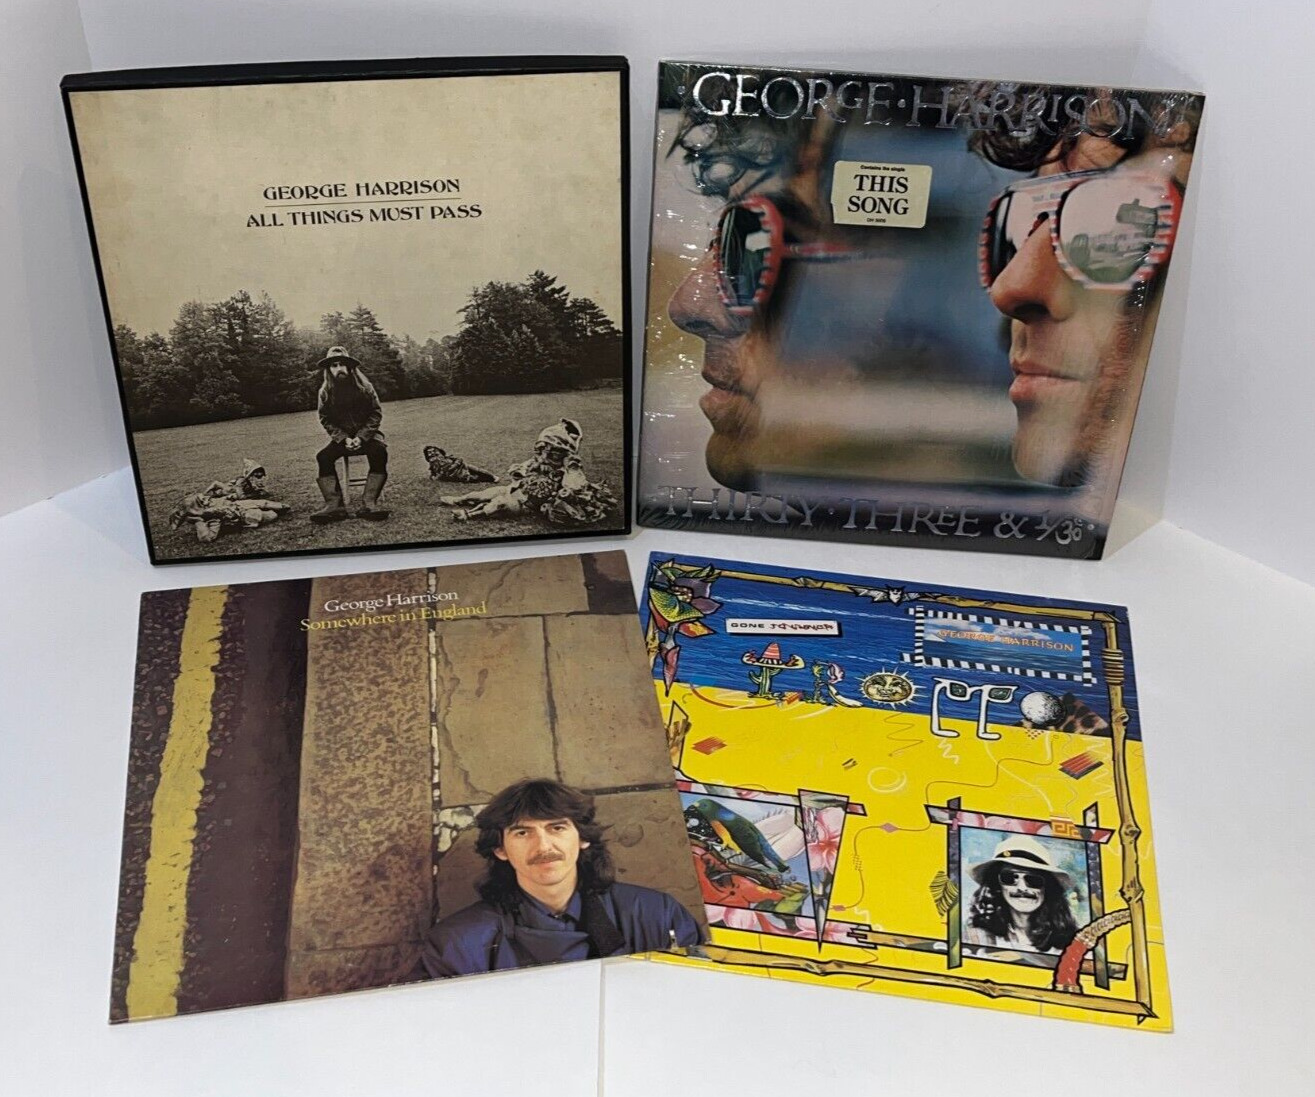 George Harrison Vinyl LP Lot All Things Must Pass 33 1/3 Somewhere In England